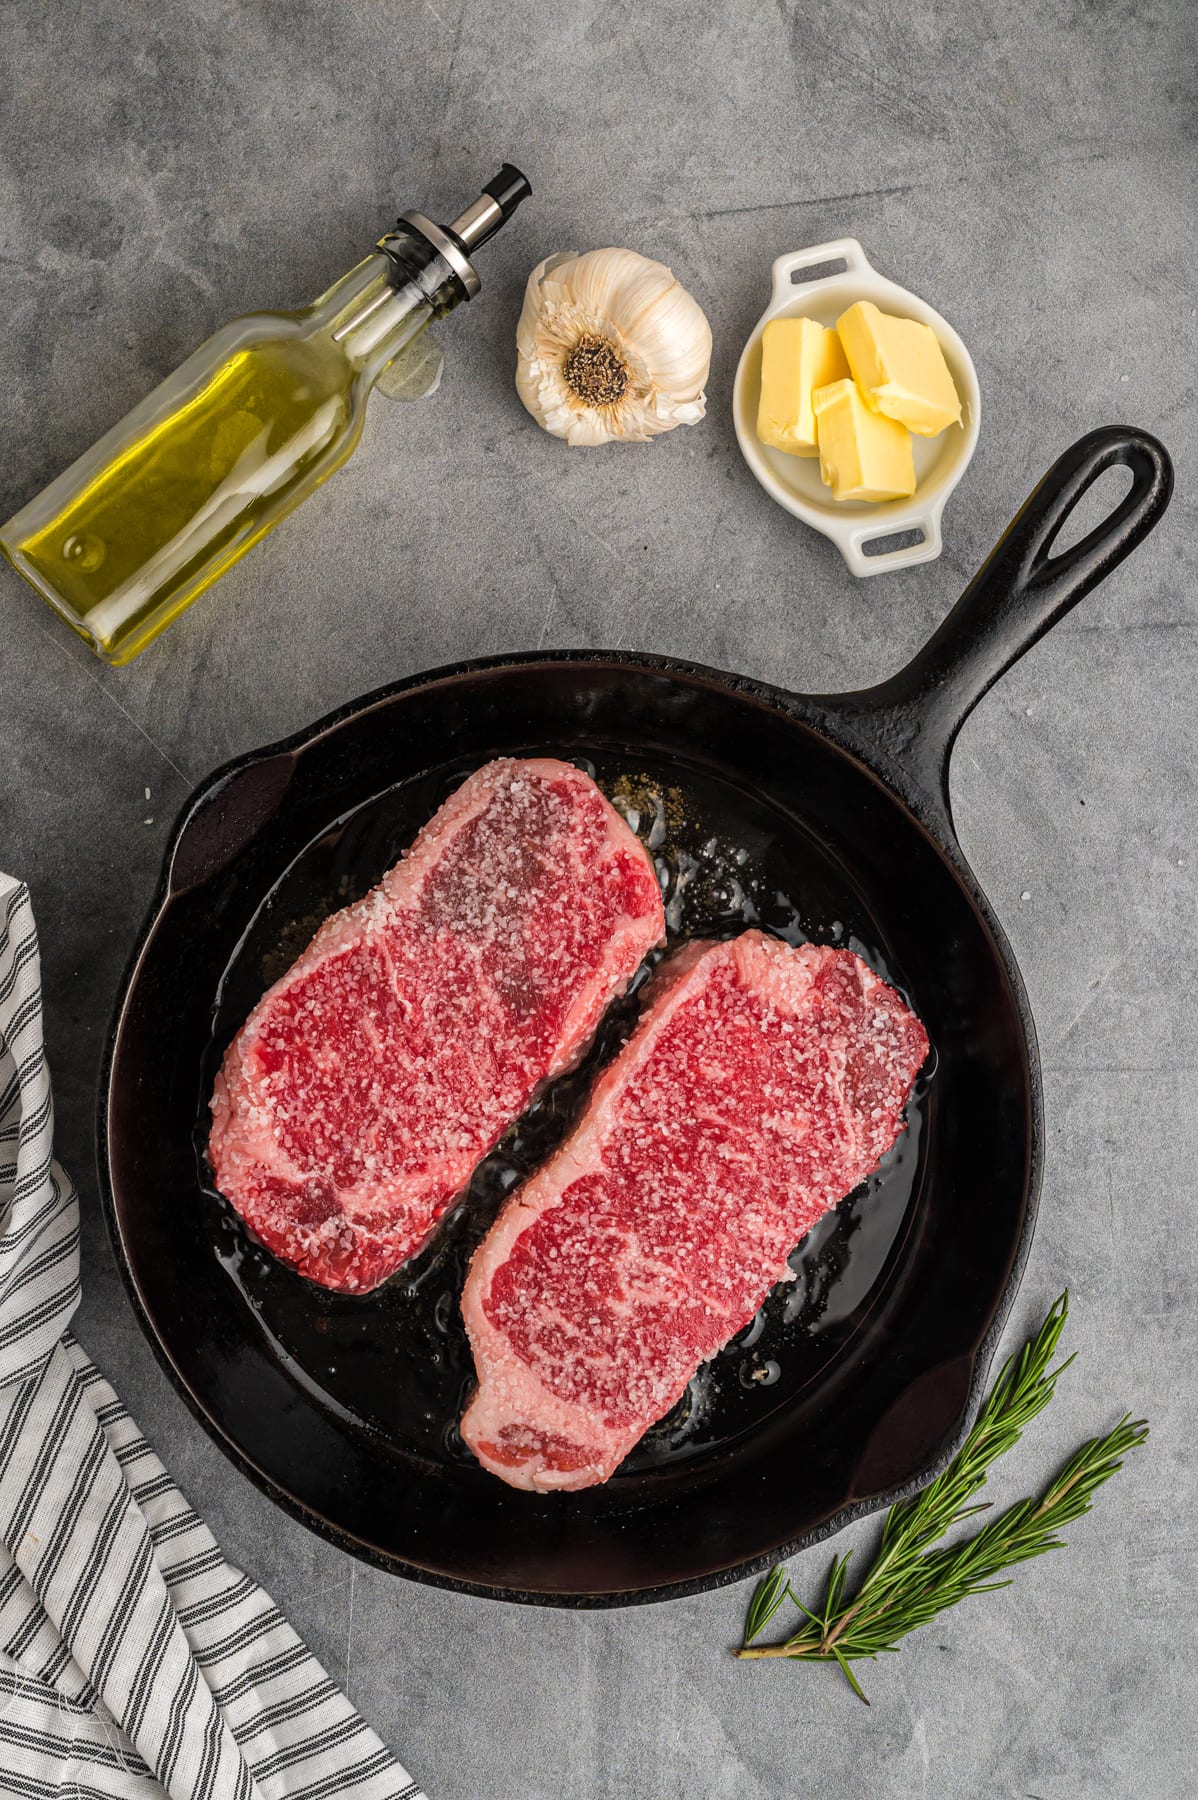 Two steaks in a cast iron skillet